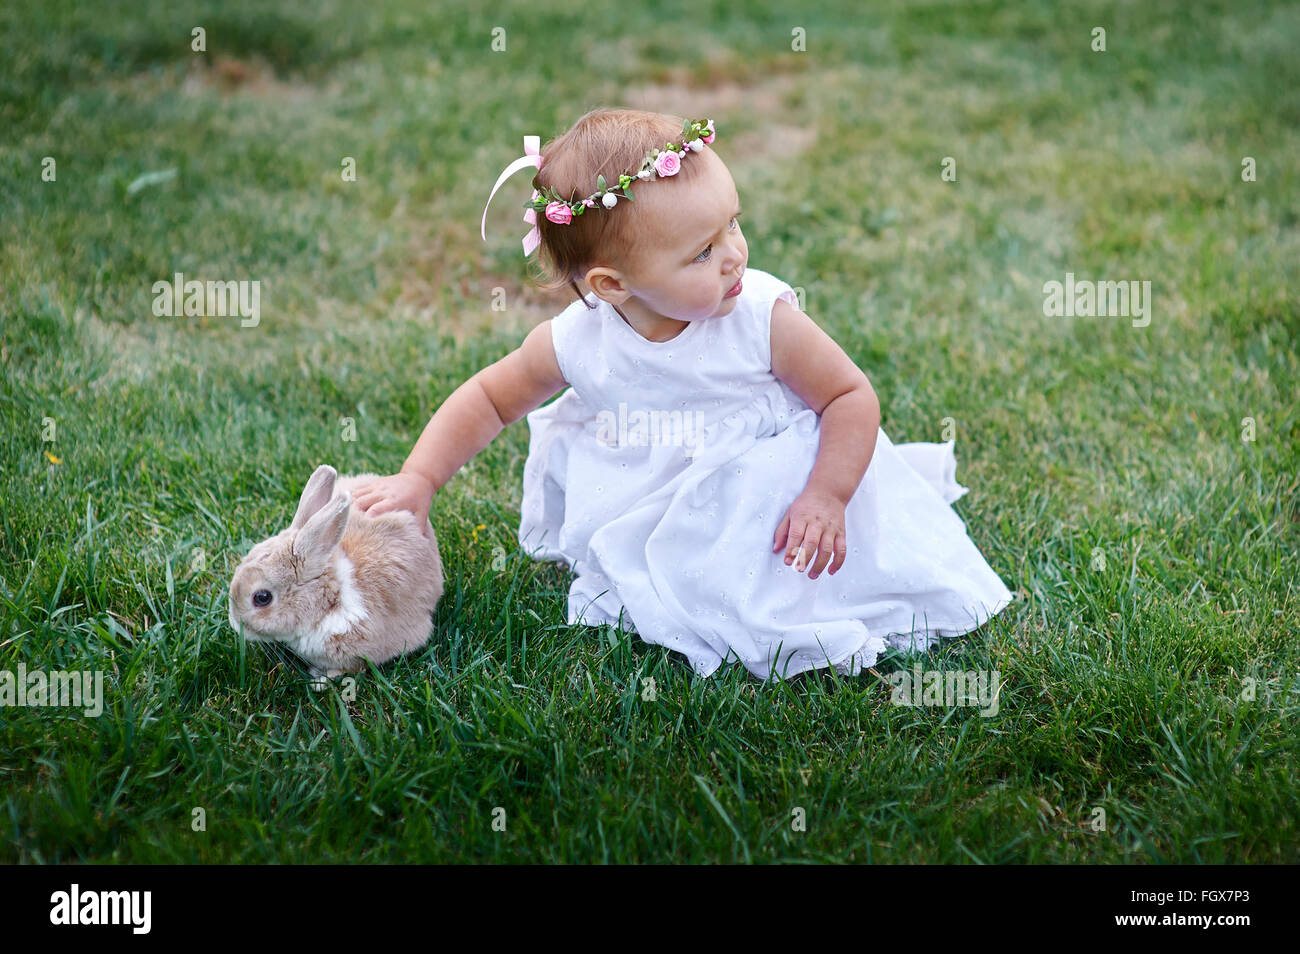 Little girl playing with a rabbit on the grass Stock Photo